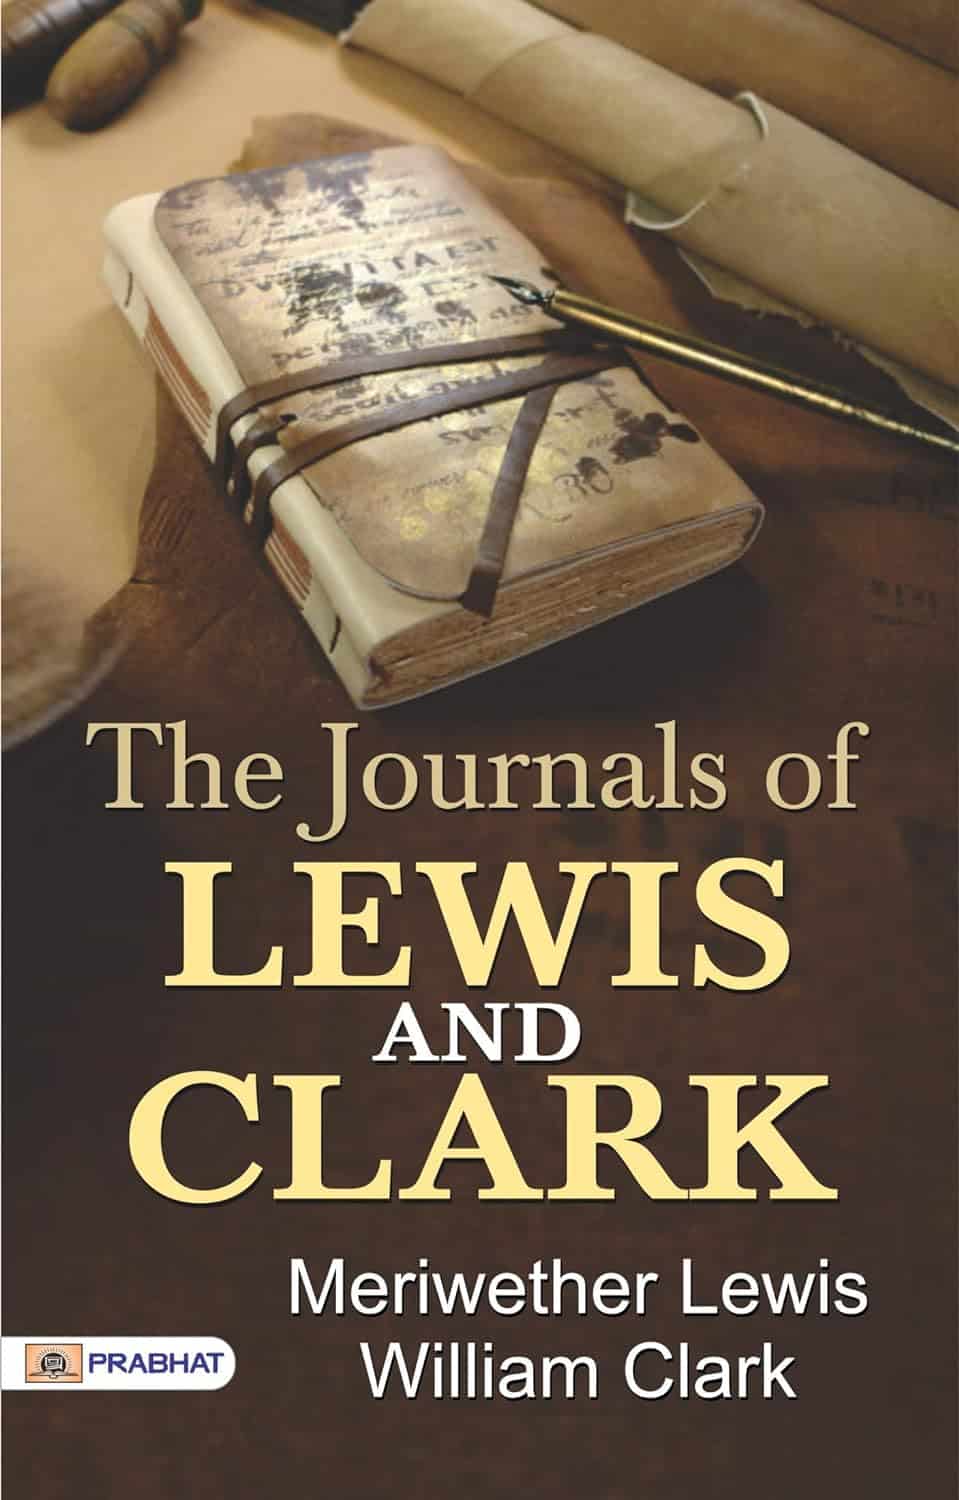 The Journals of Lewis and Clark by Meriwether Lewis and William Clark (1814)